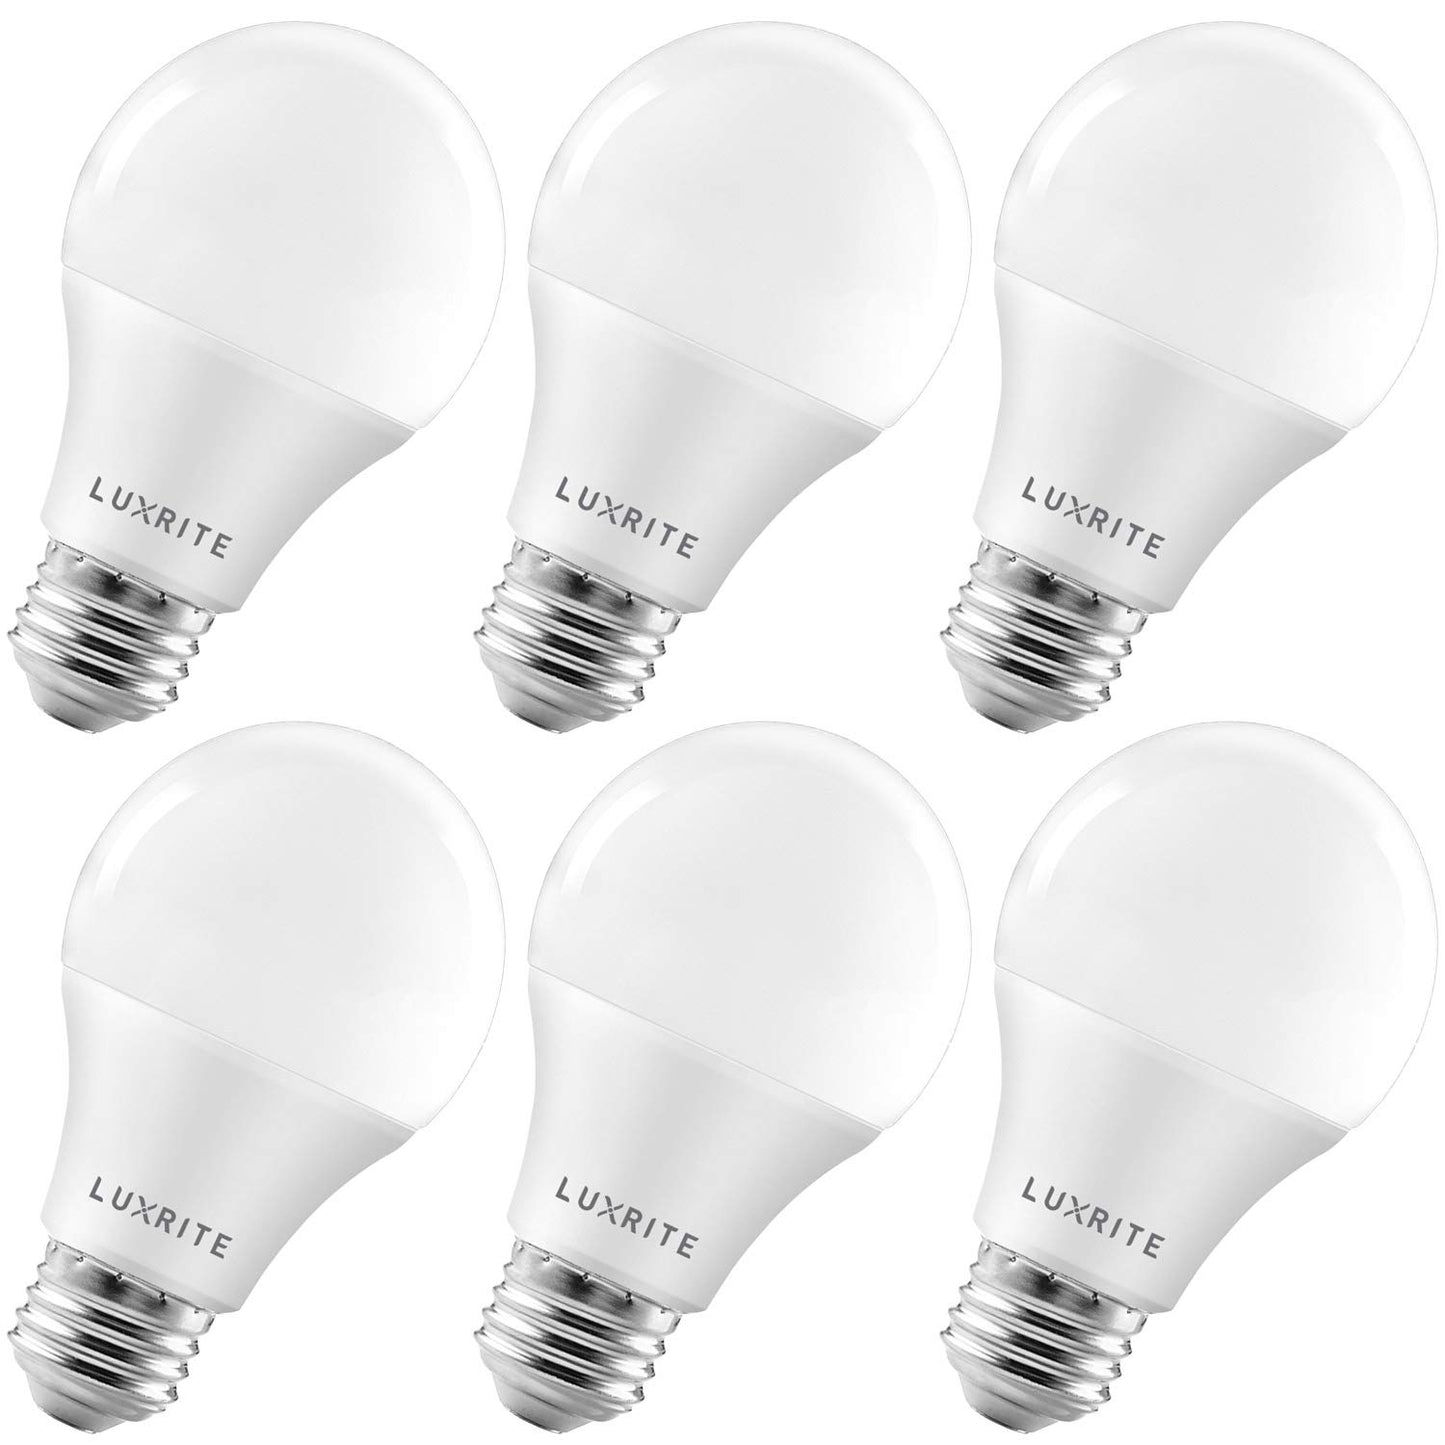 Luxrite LR21433 A19 LED Bulb 75W Equivalent, 1100 Lumens, 5000K Cool White, Dimmable Standard LED Light Bulb